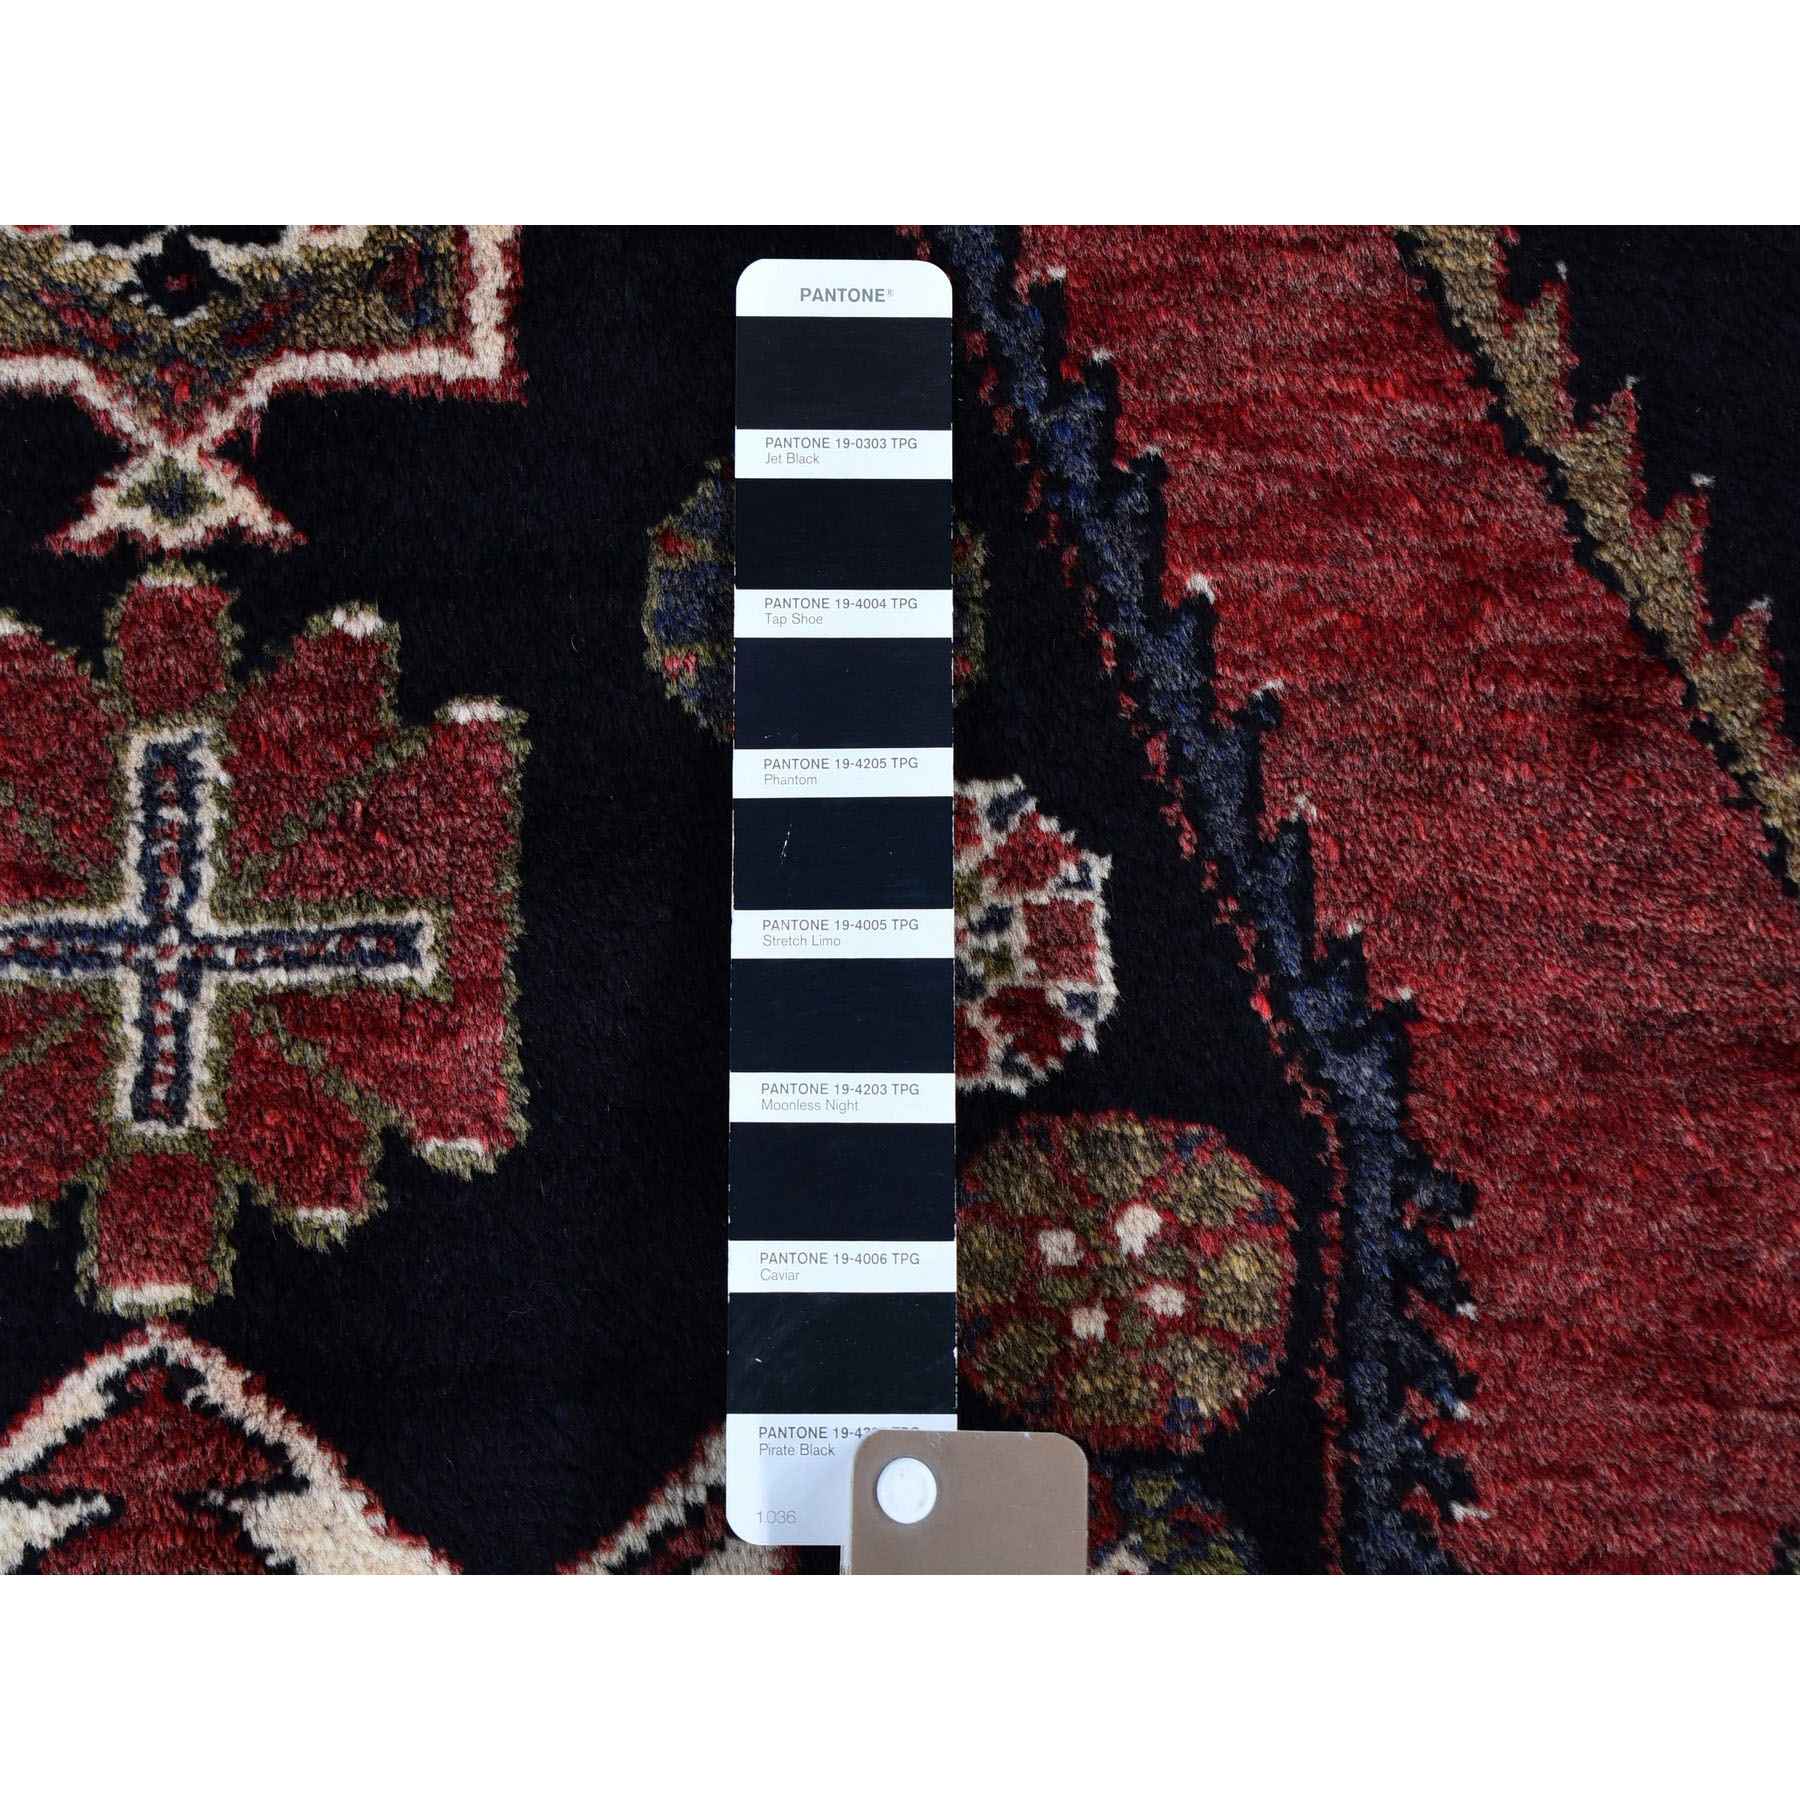 Persian-Hand-Knotted-Rug-297835